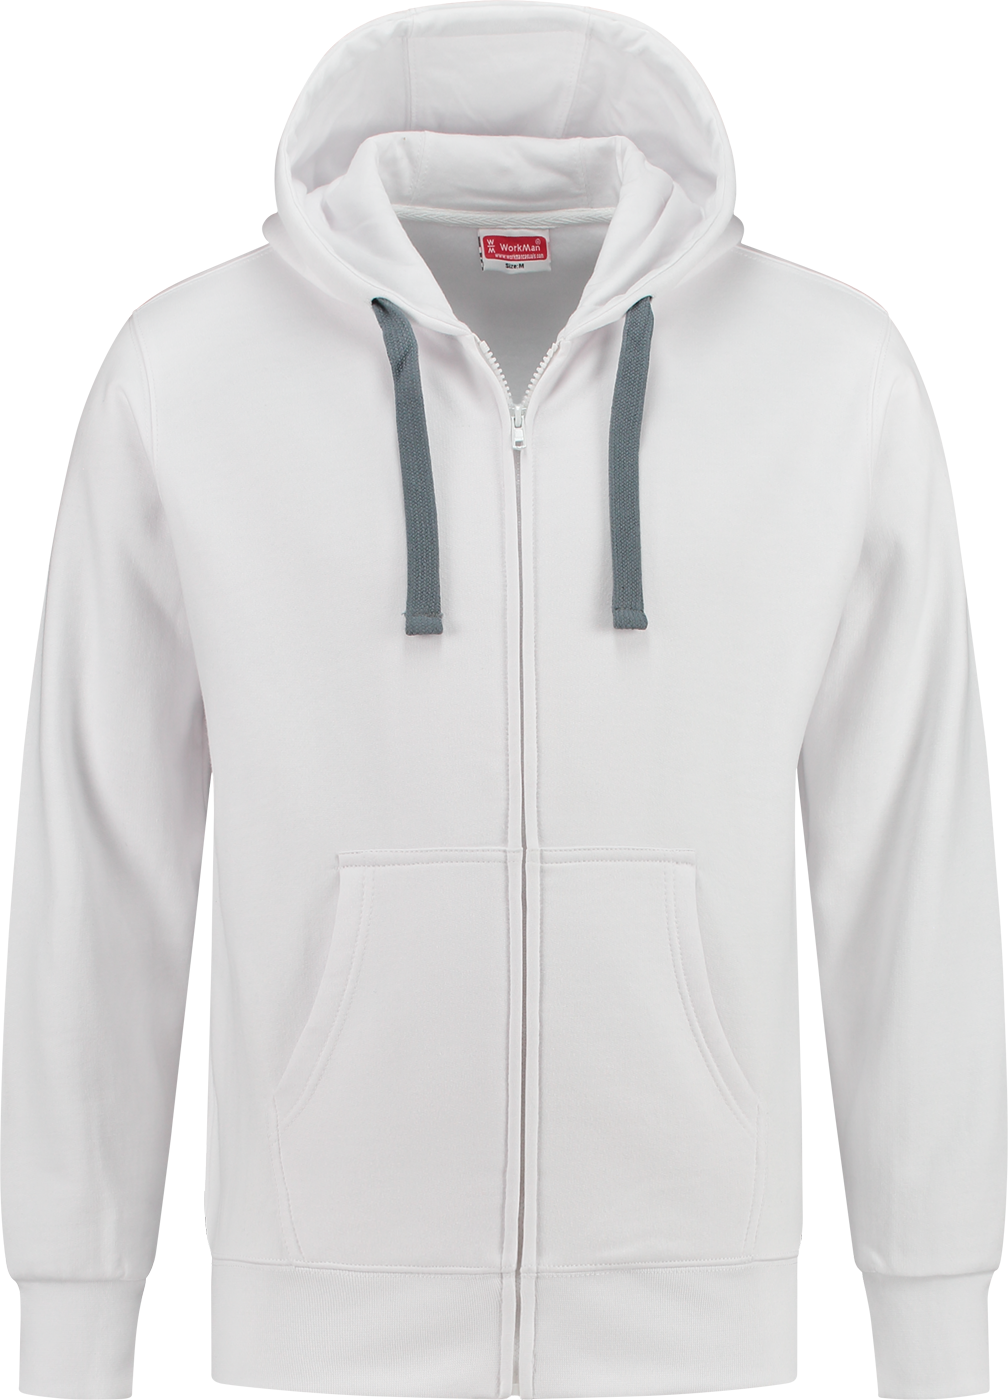 8601 Hooded Sweatvest Outfitters White